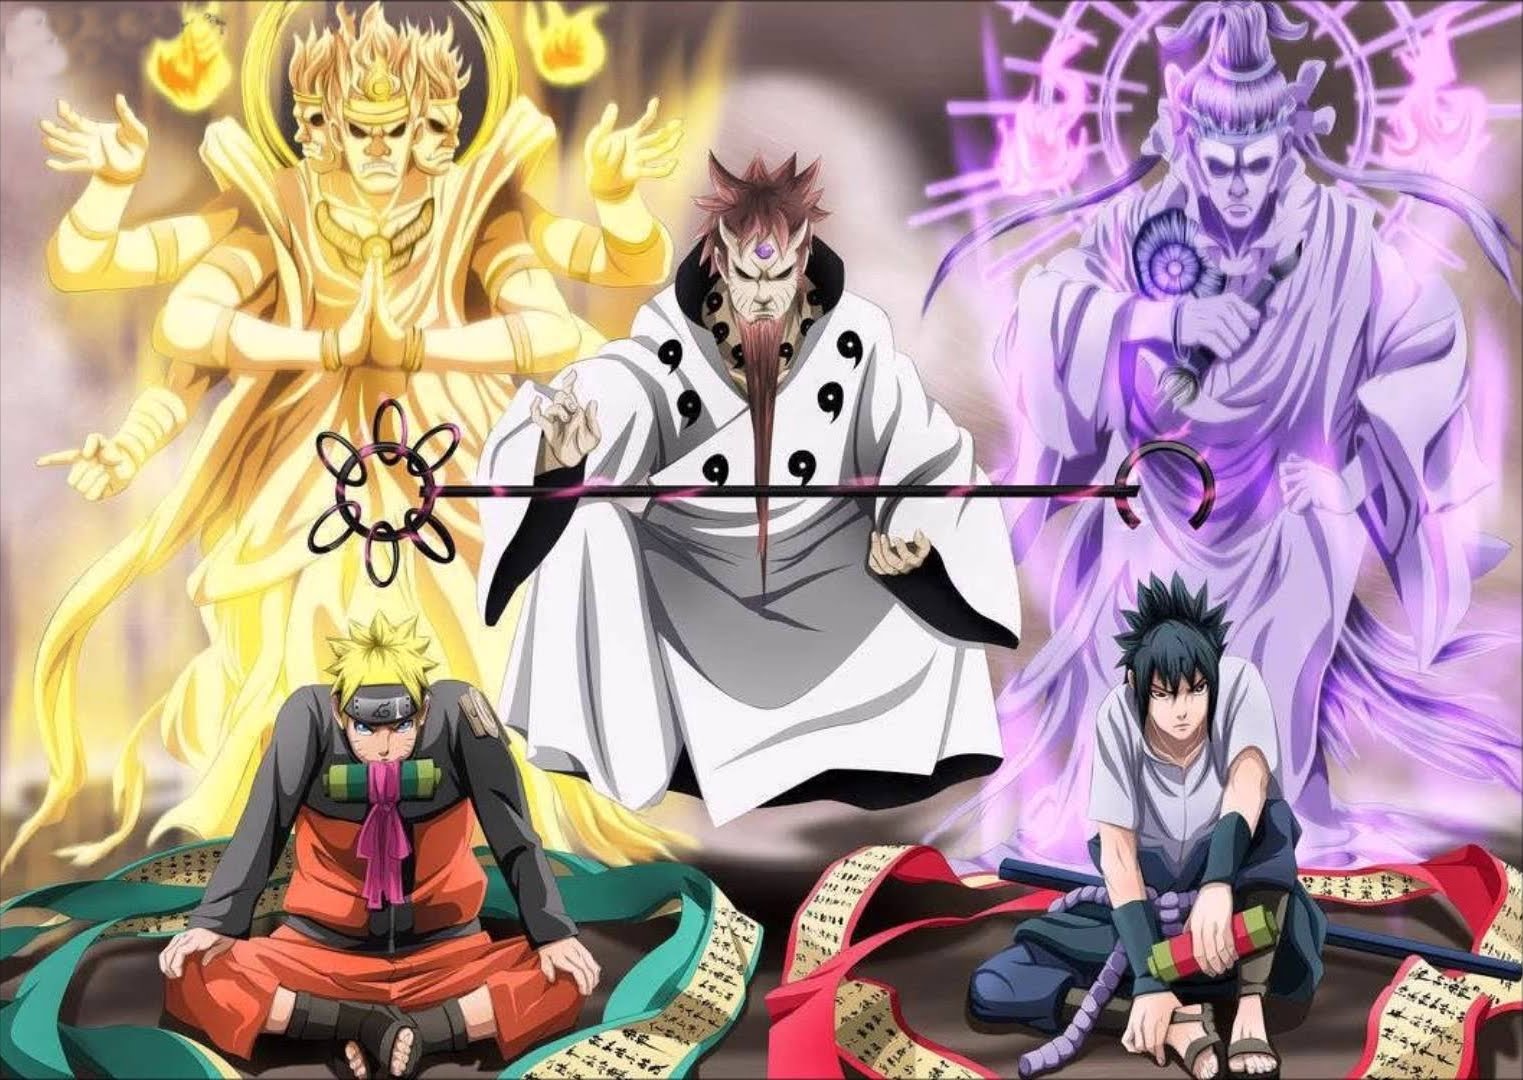 Naruto All Forms Wallpaper Free Naruto All Forms Background